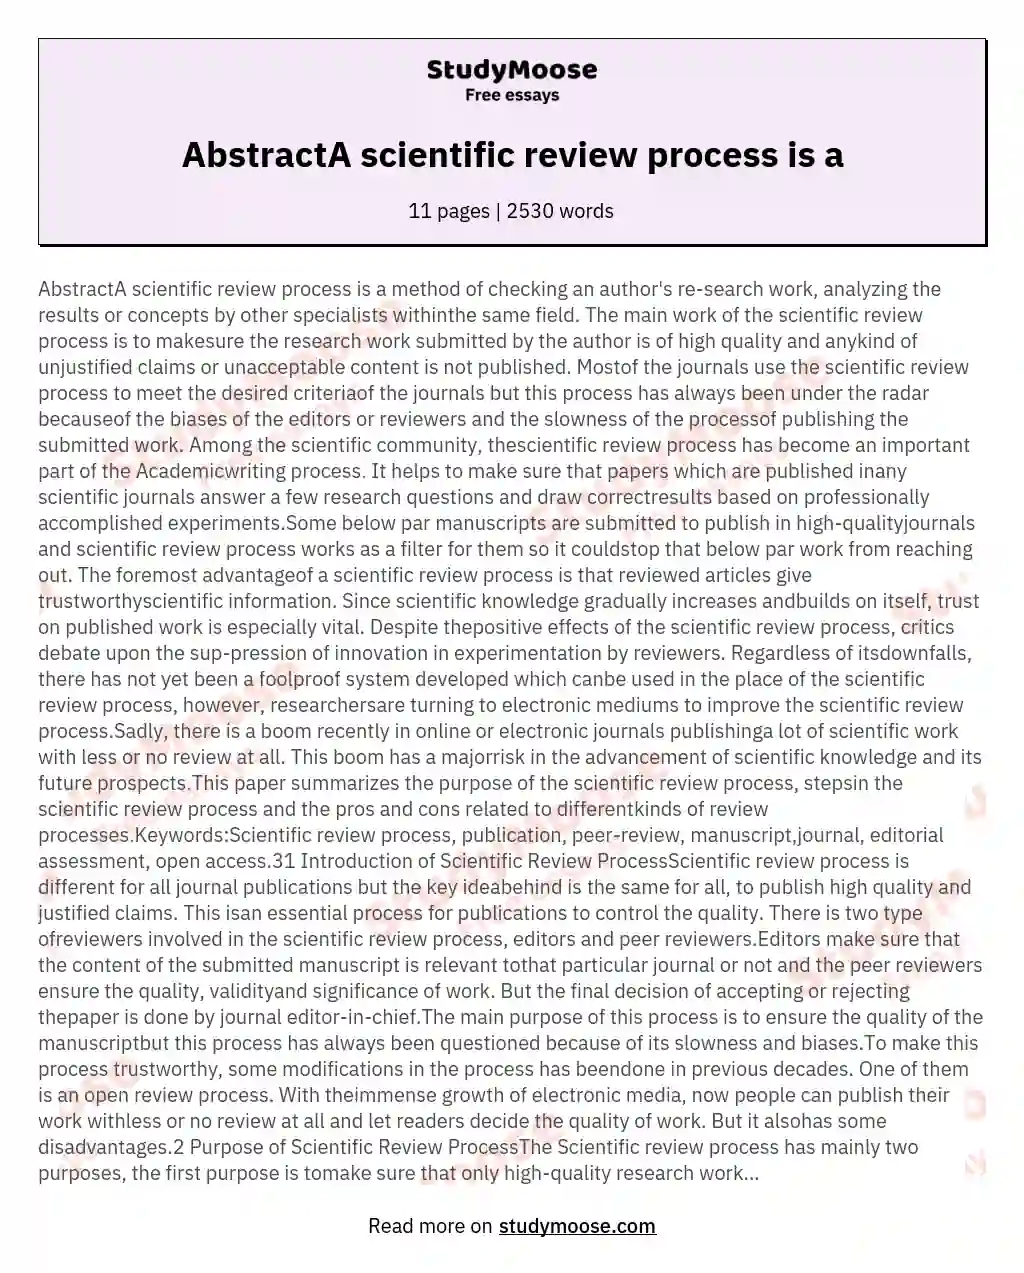 AbstractA scientific review process is a essay